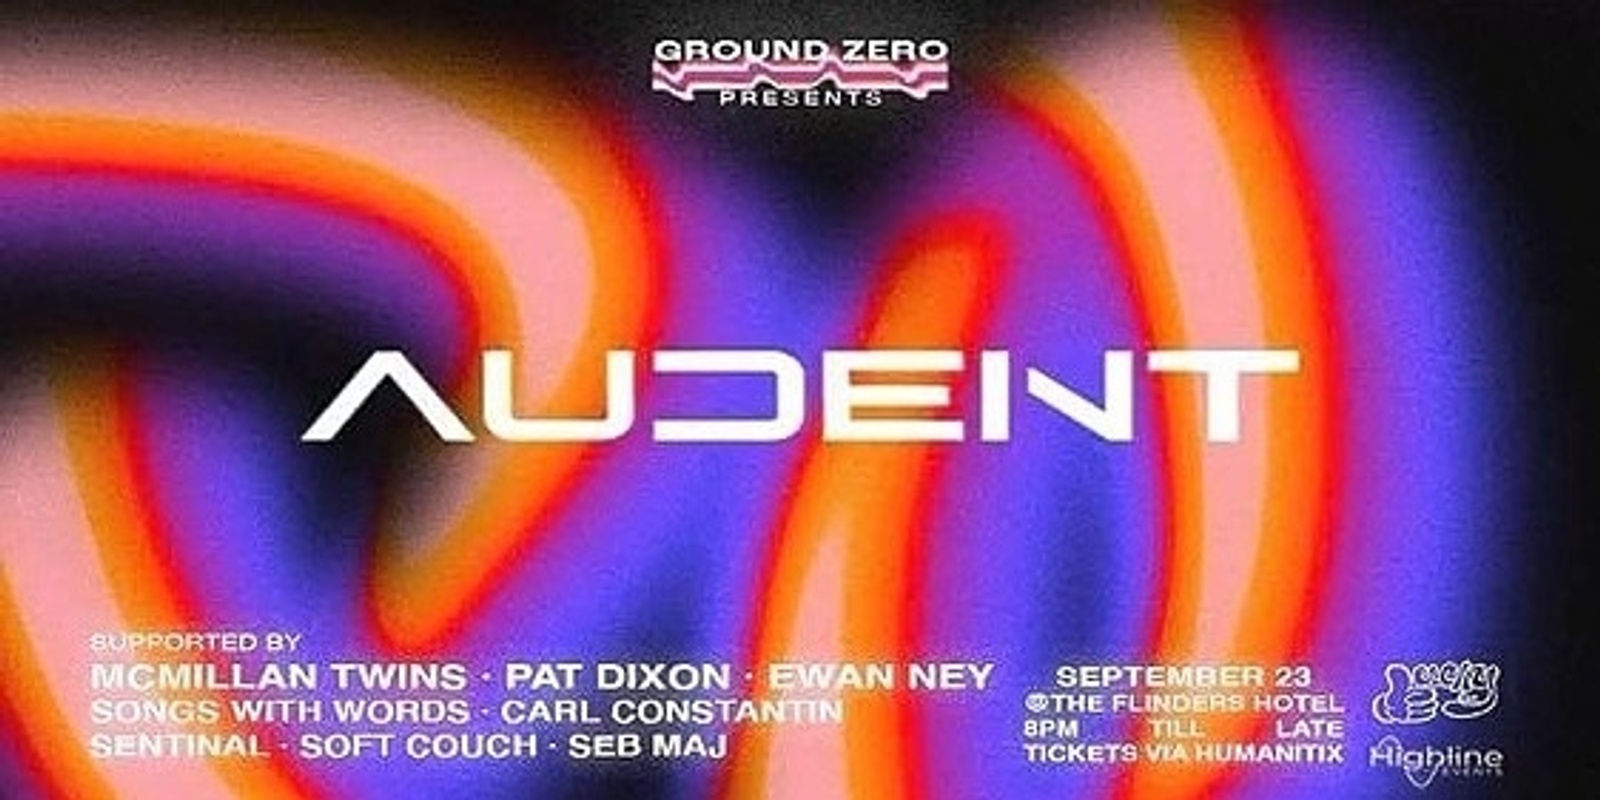 Banner image for Ground Zero pres. AUDENT @ The Flinders